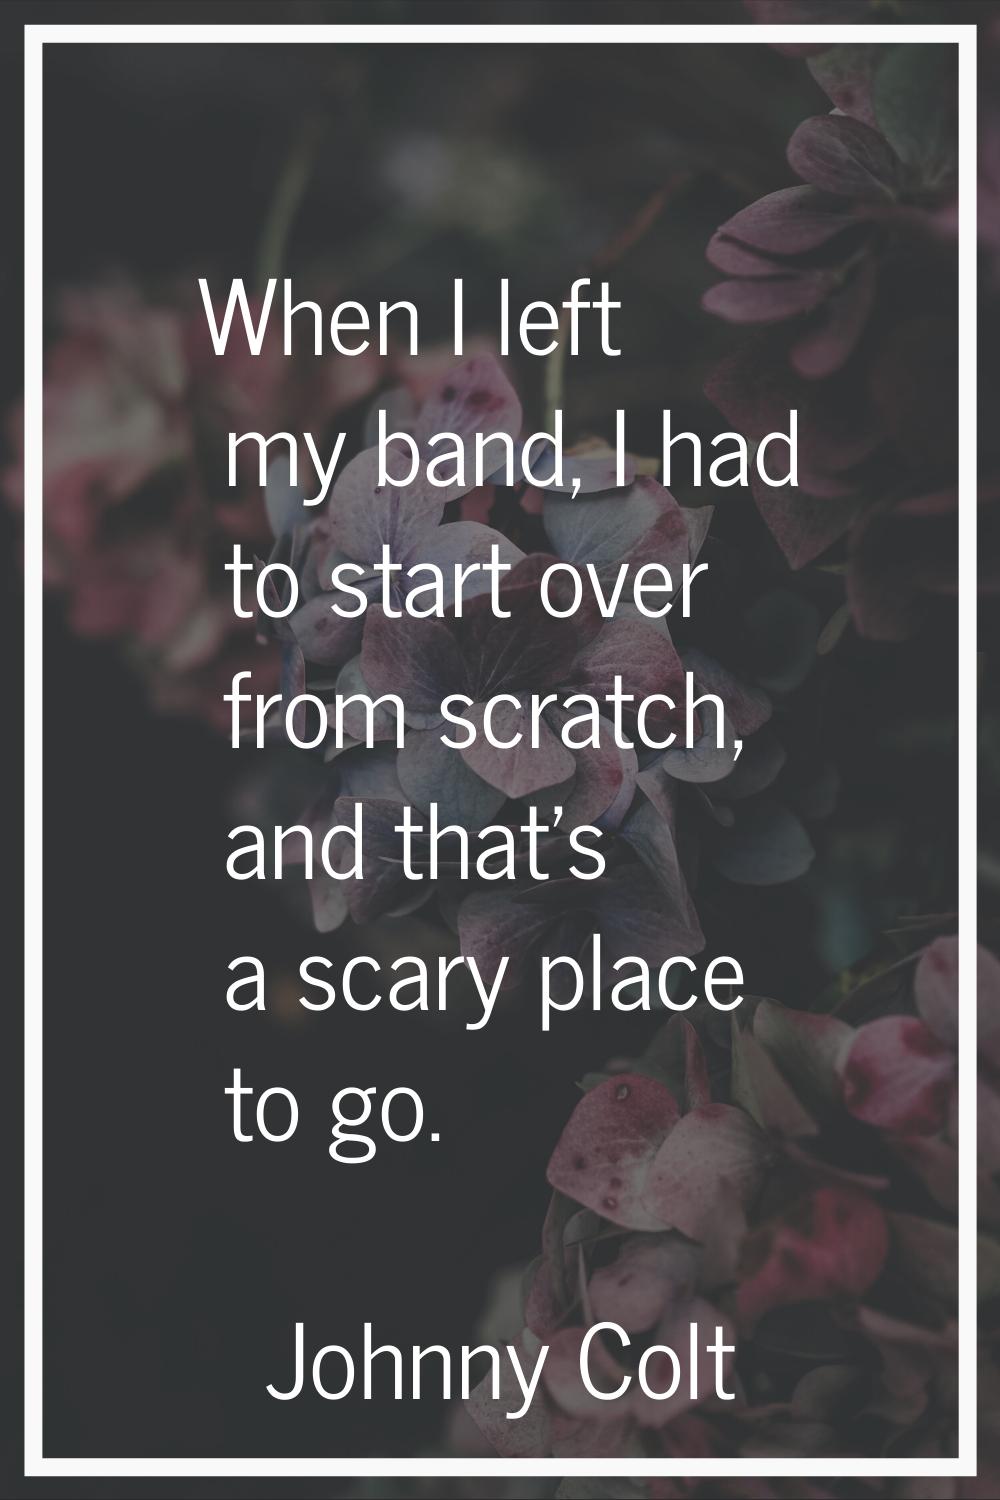 When I left my band, I had to start over from scratch, and that's a scary place to go.